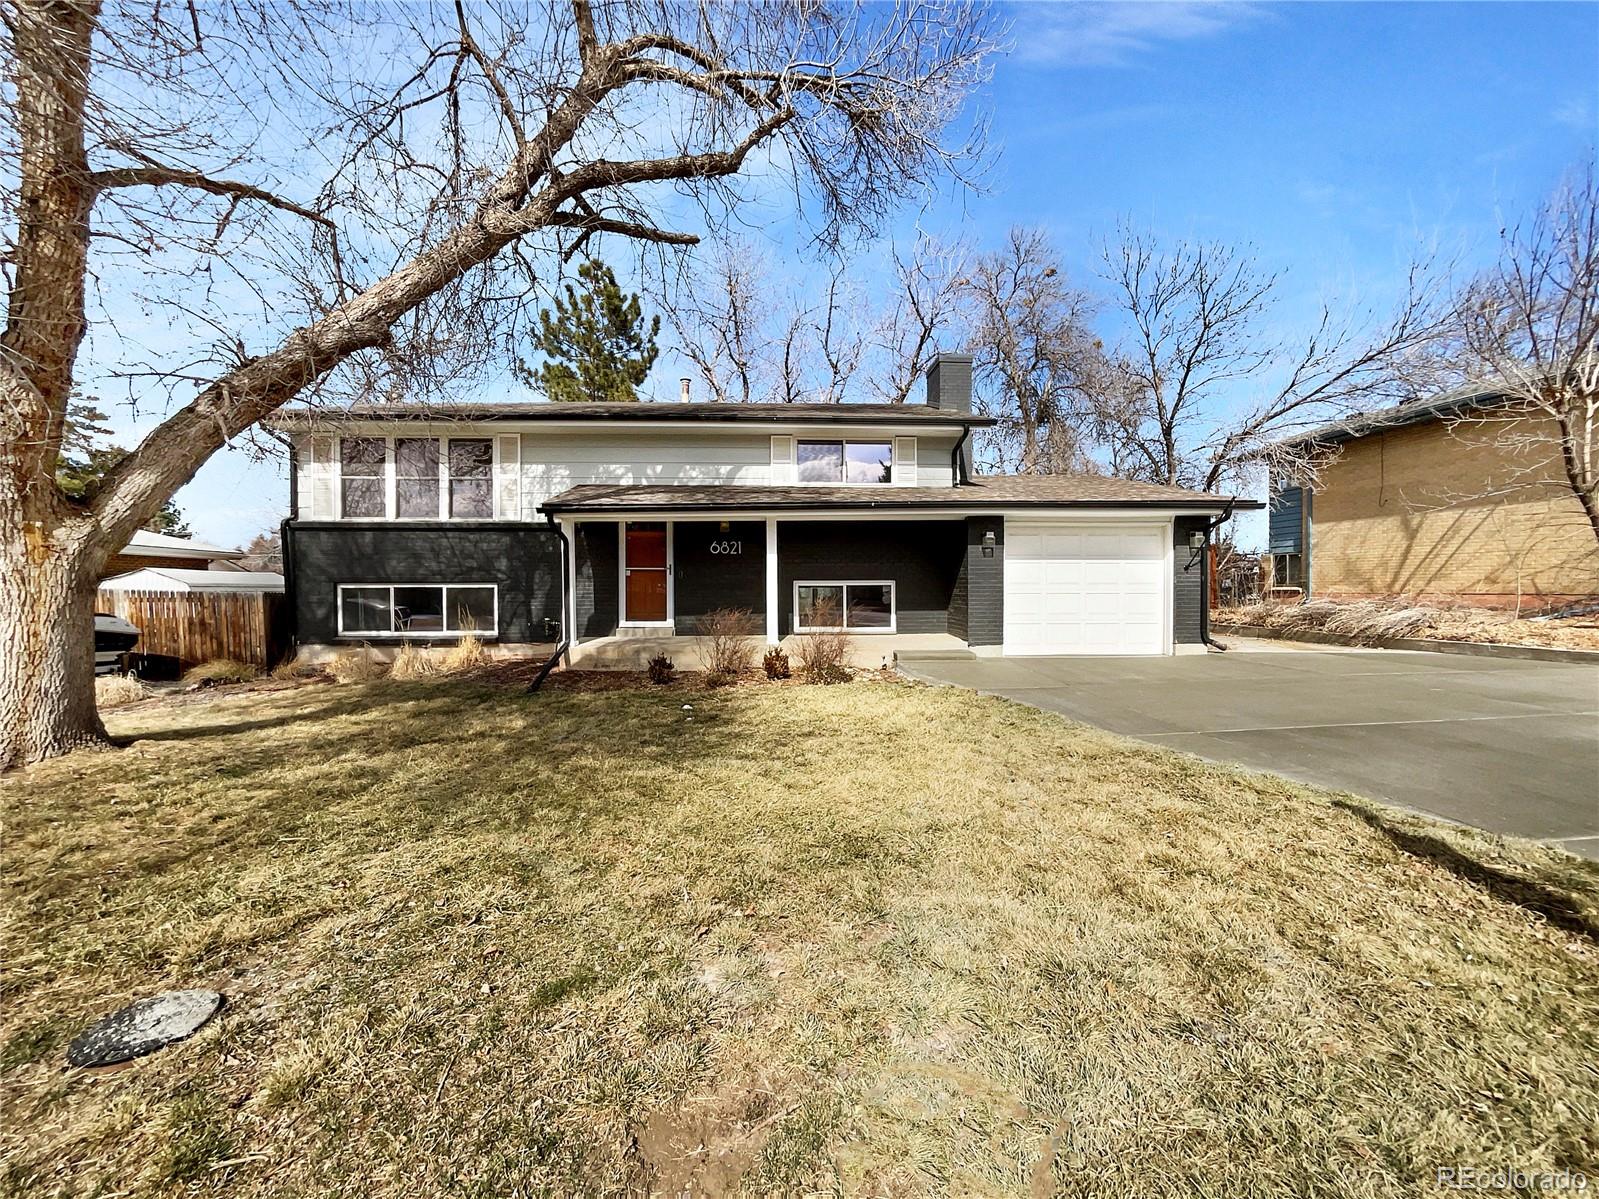 6821 W 75th Place, arvada MLS: 4887328 Beds: 4 Baths: 2 Price: $600,000